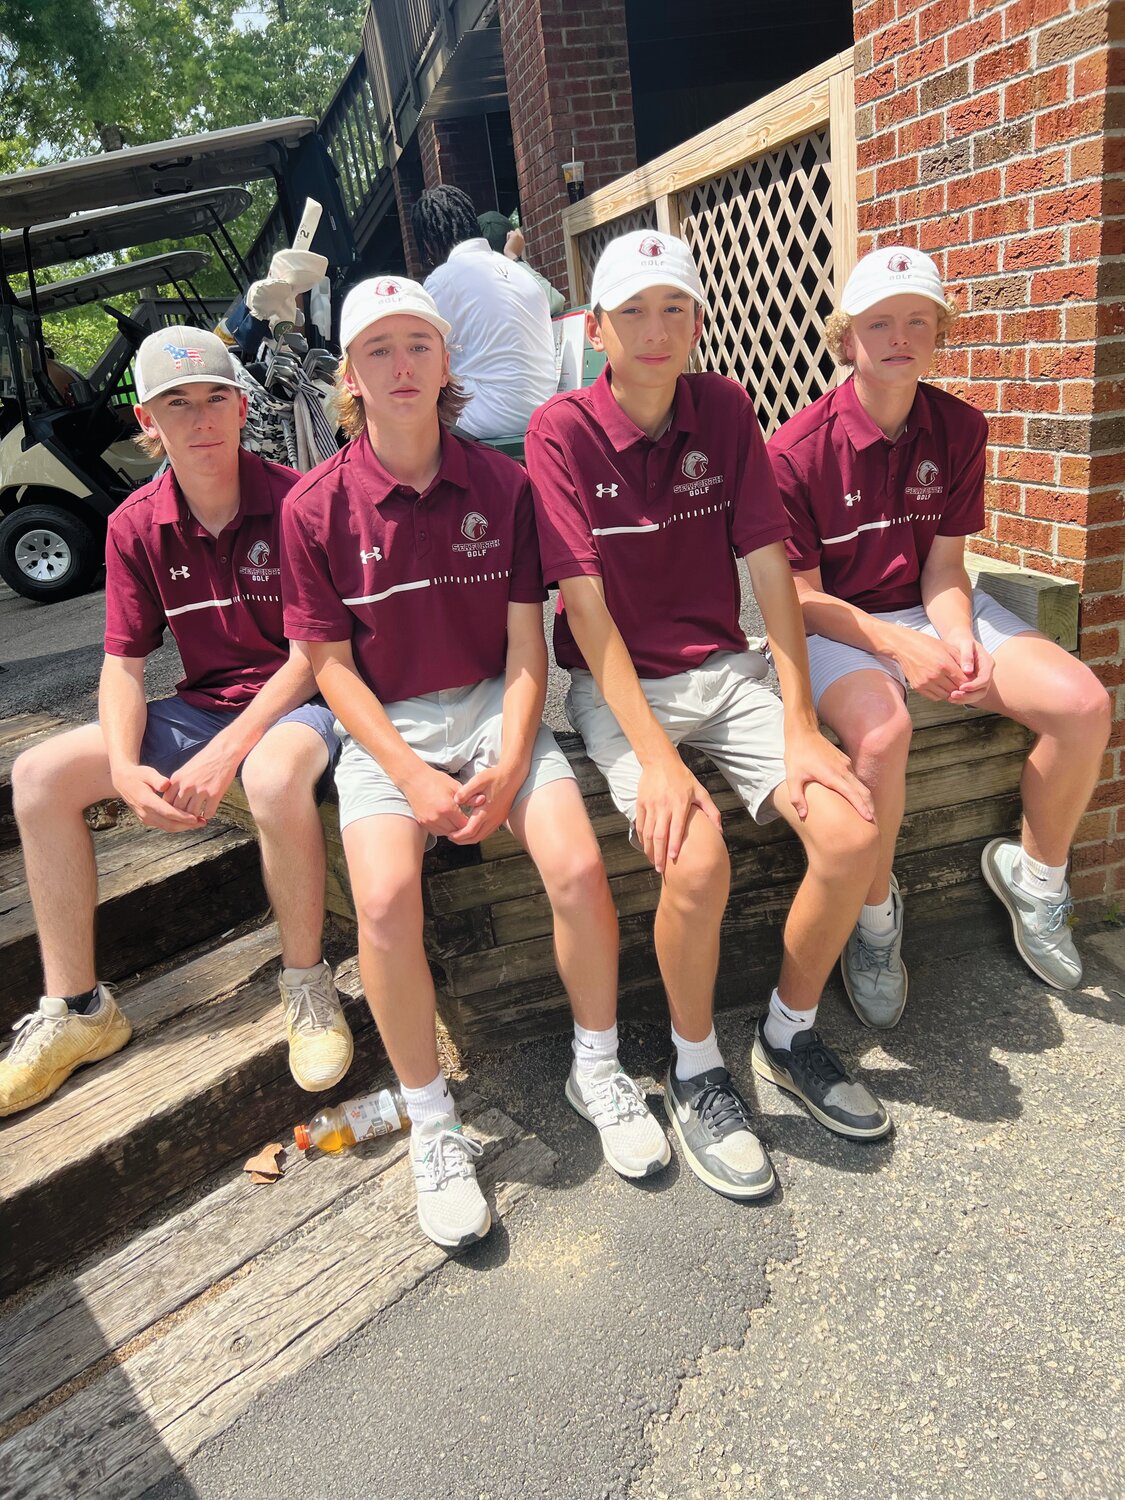 Seaforth golfers, from left to right: Gray Stewart, Ty Willoughby, Griffin Ching and Campbell Meador.